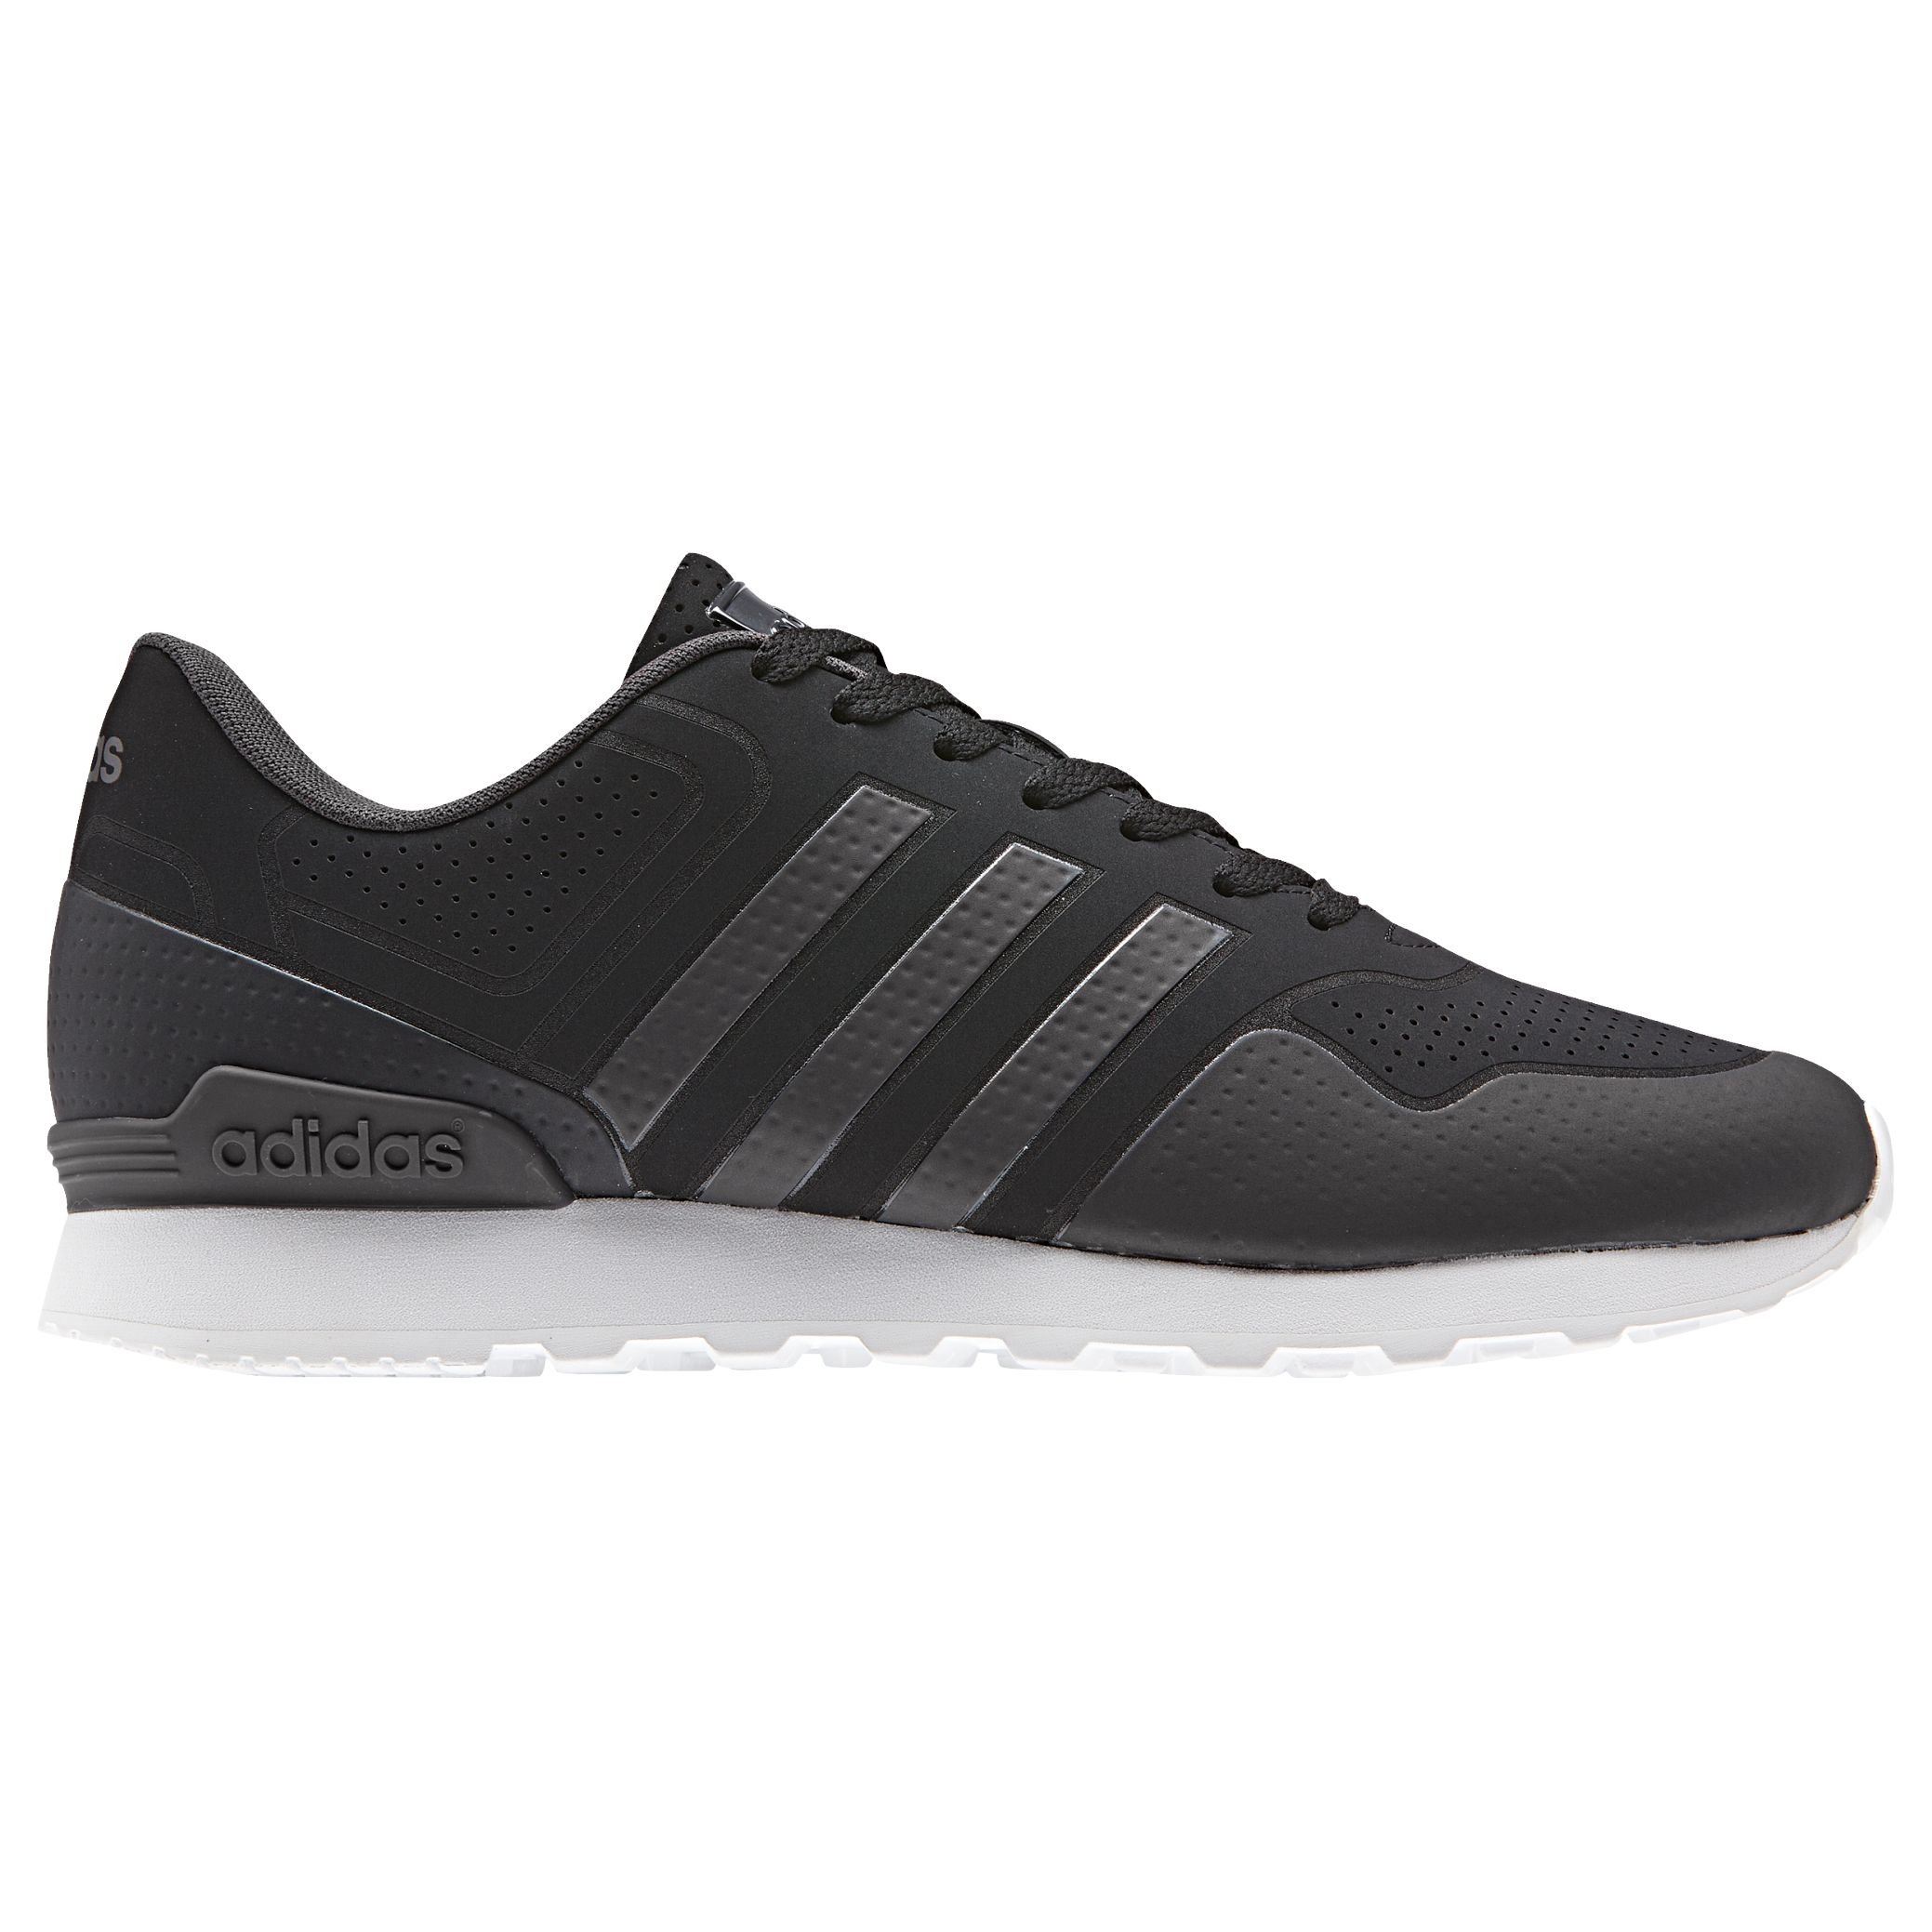 adidas Neo 10K Casual Men's Trainers, Black